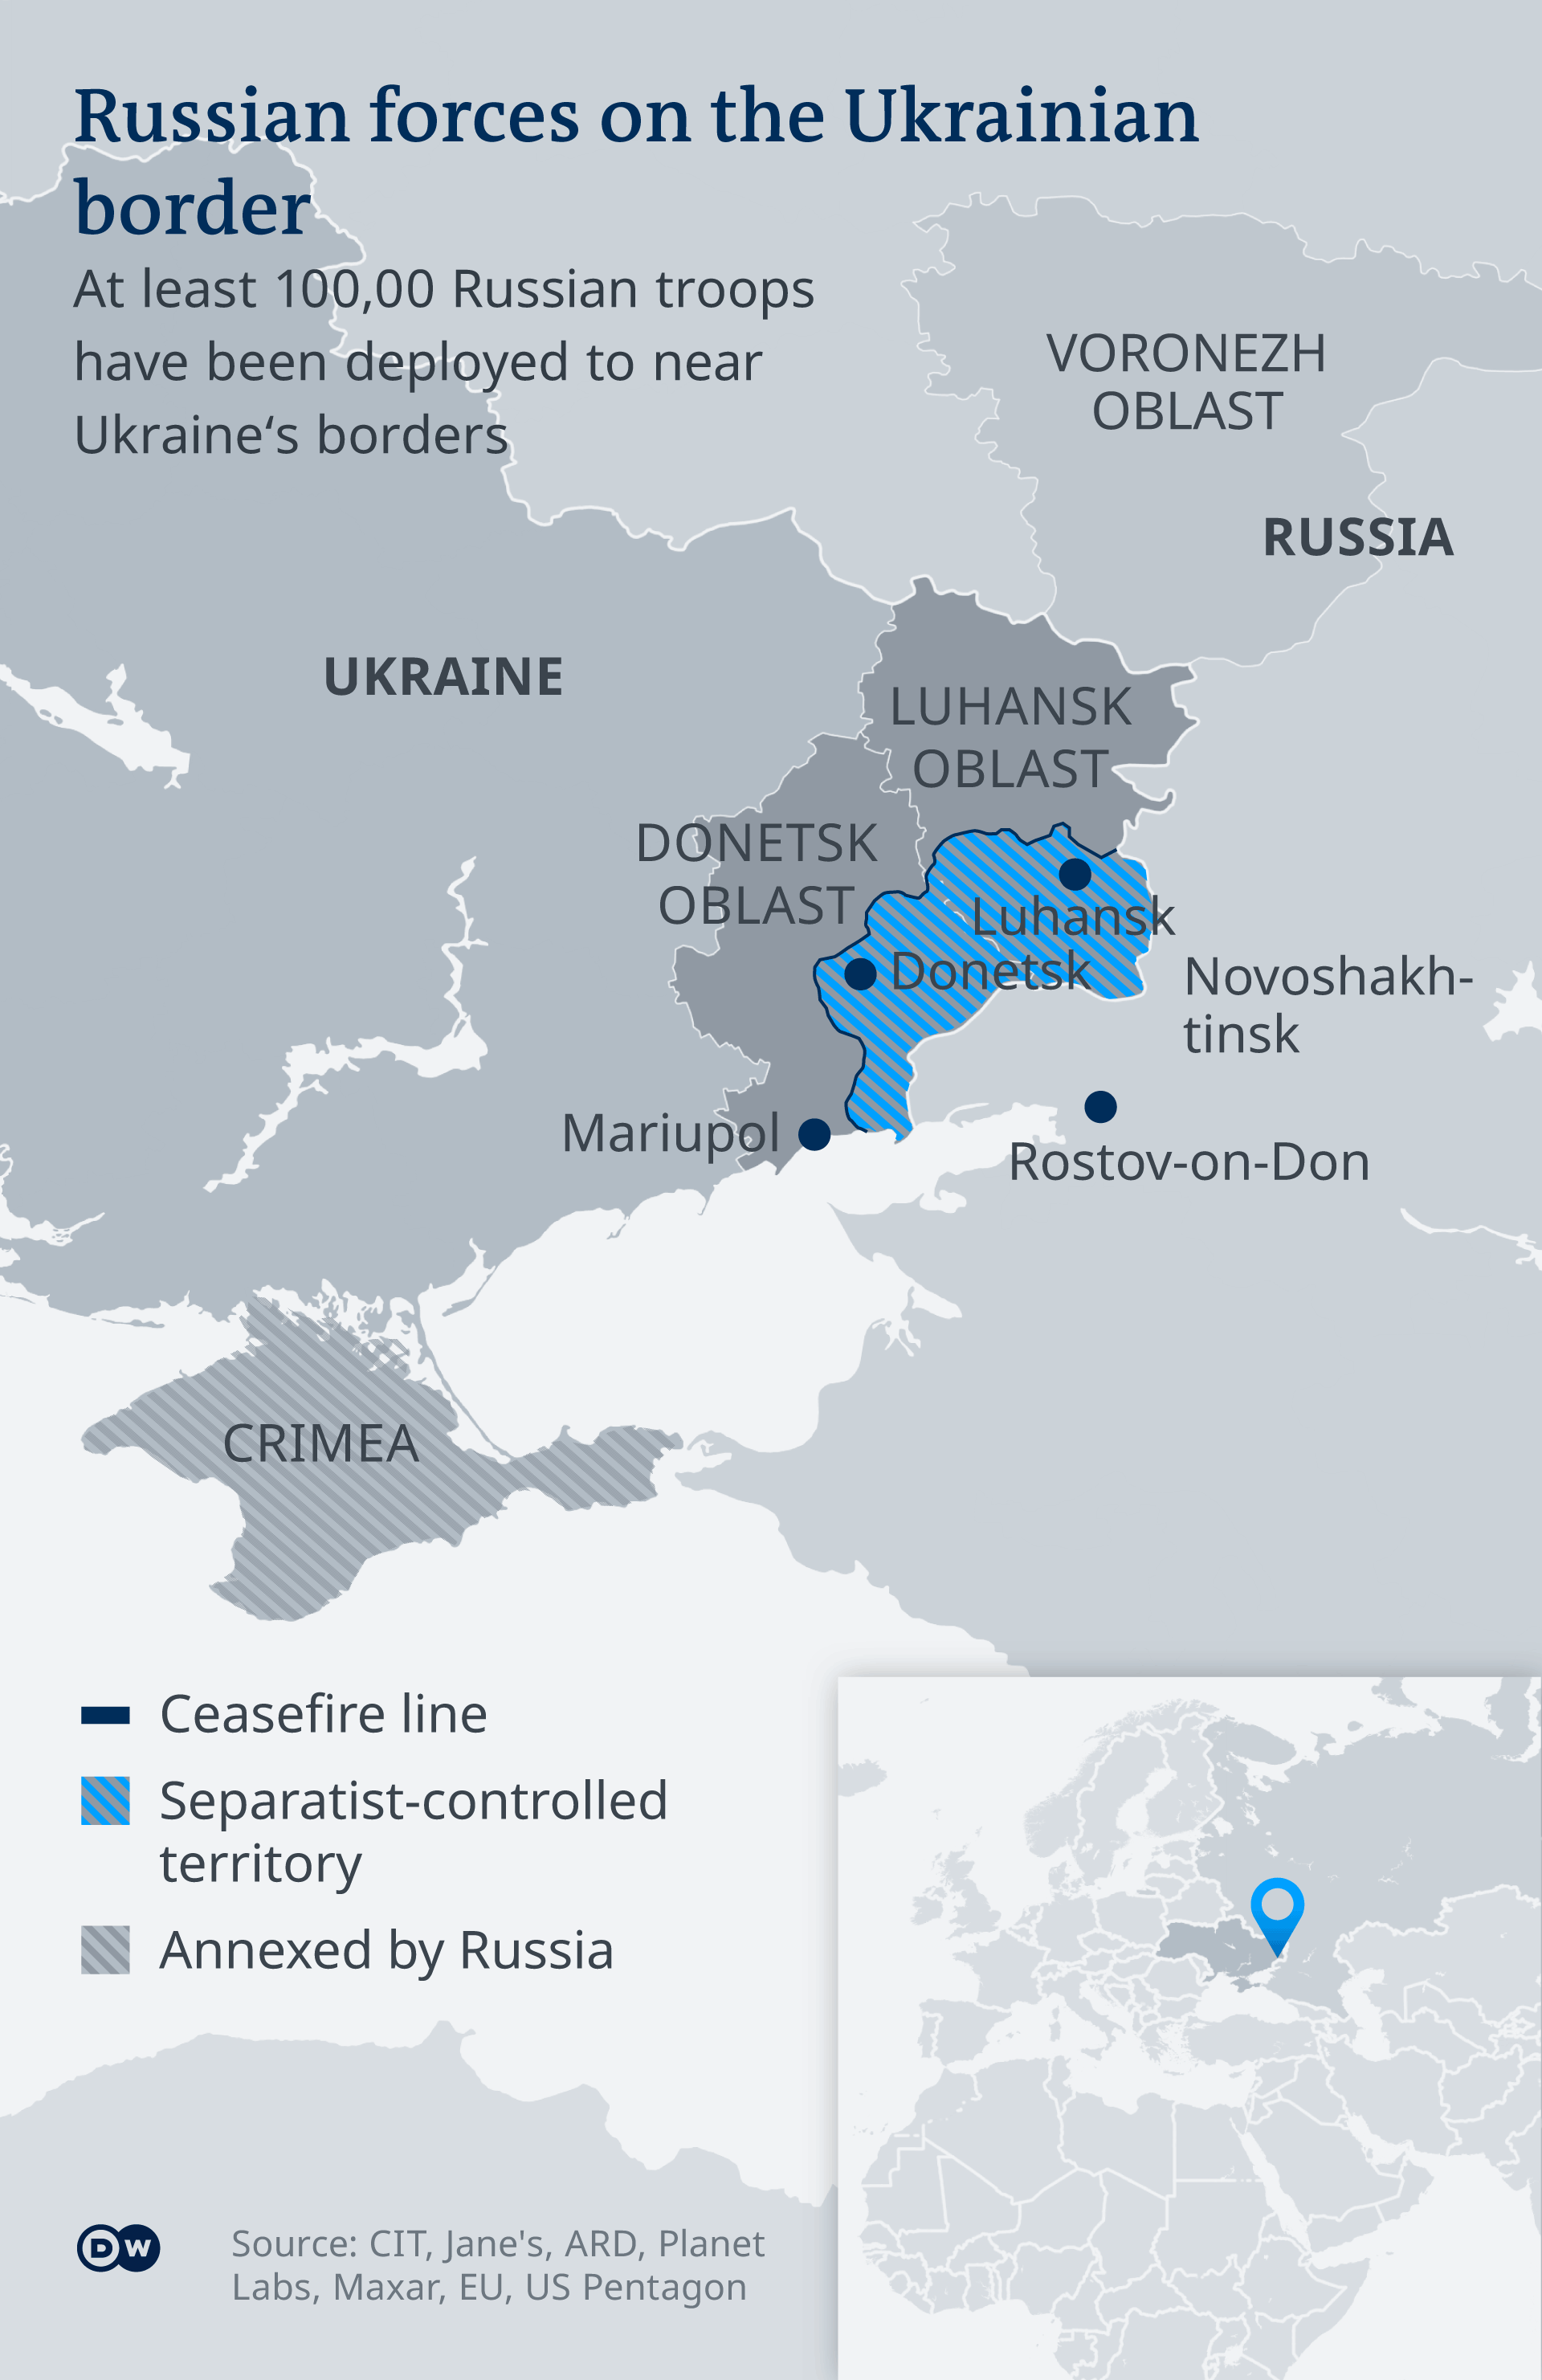 A map showing Ukraine, its rebel-controlled areas, and Russia